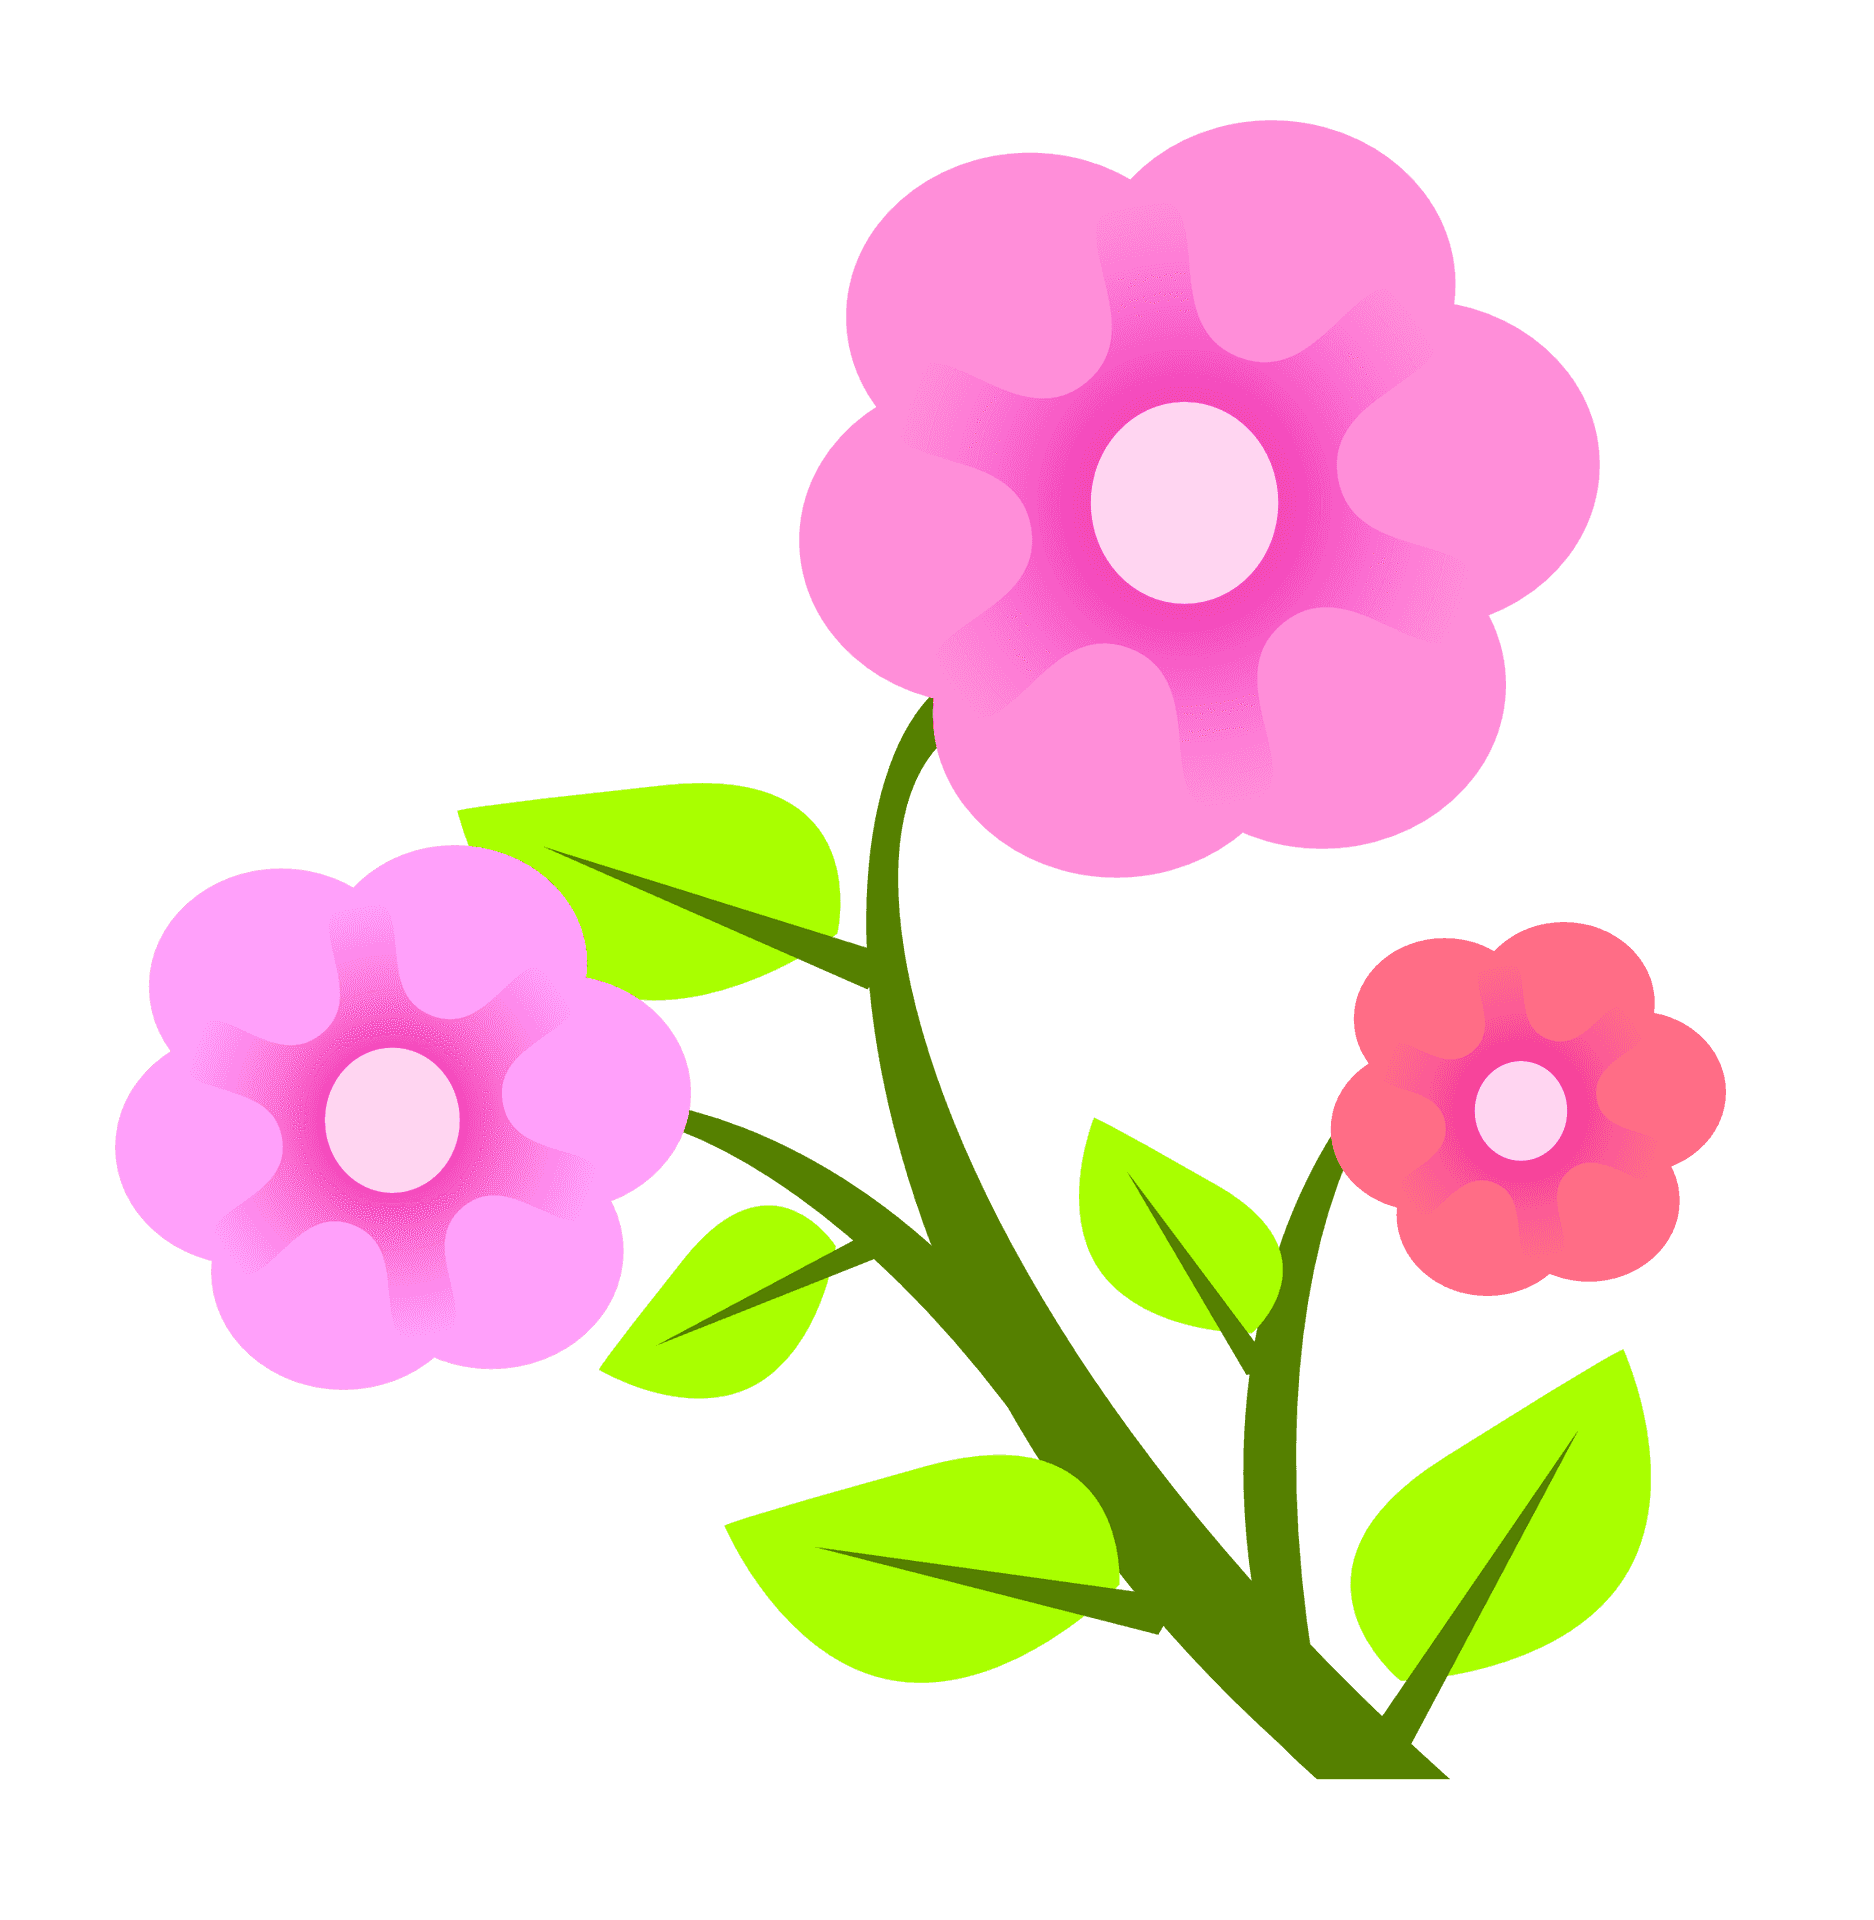 Stylized Pink Flowers Illustration PNG